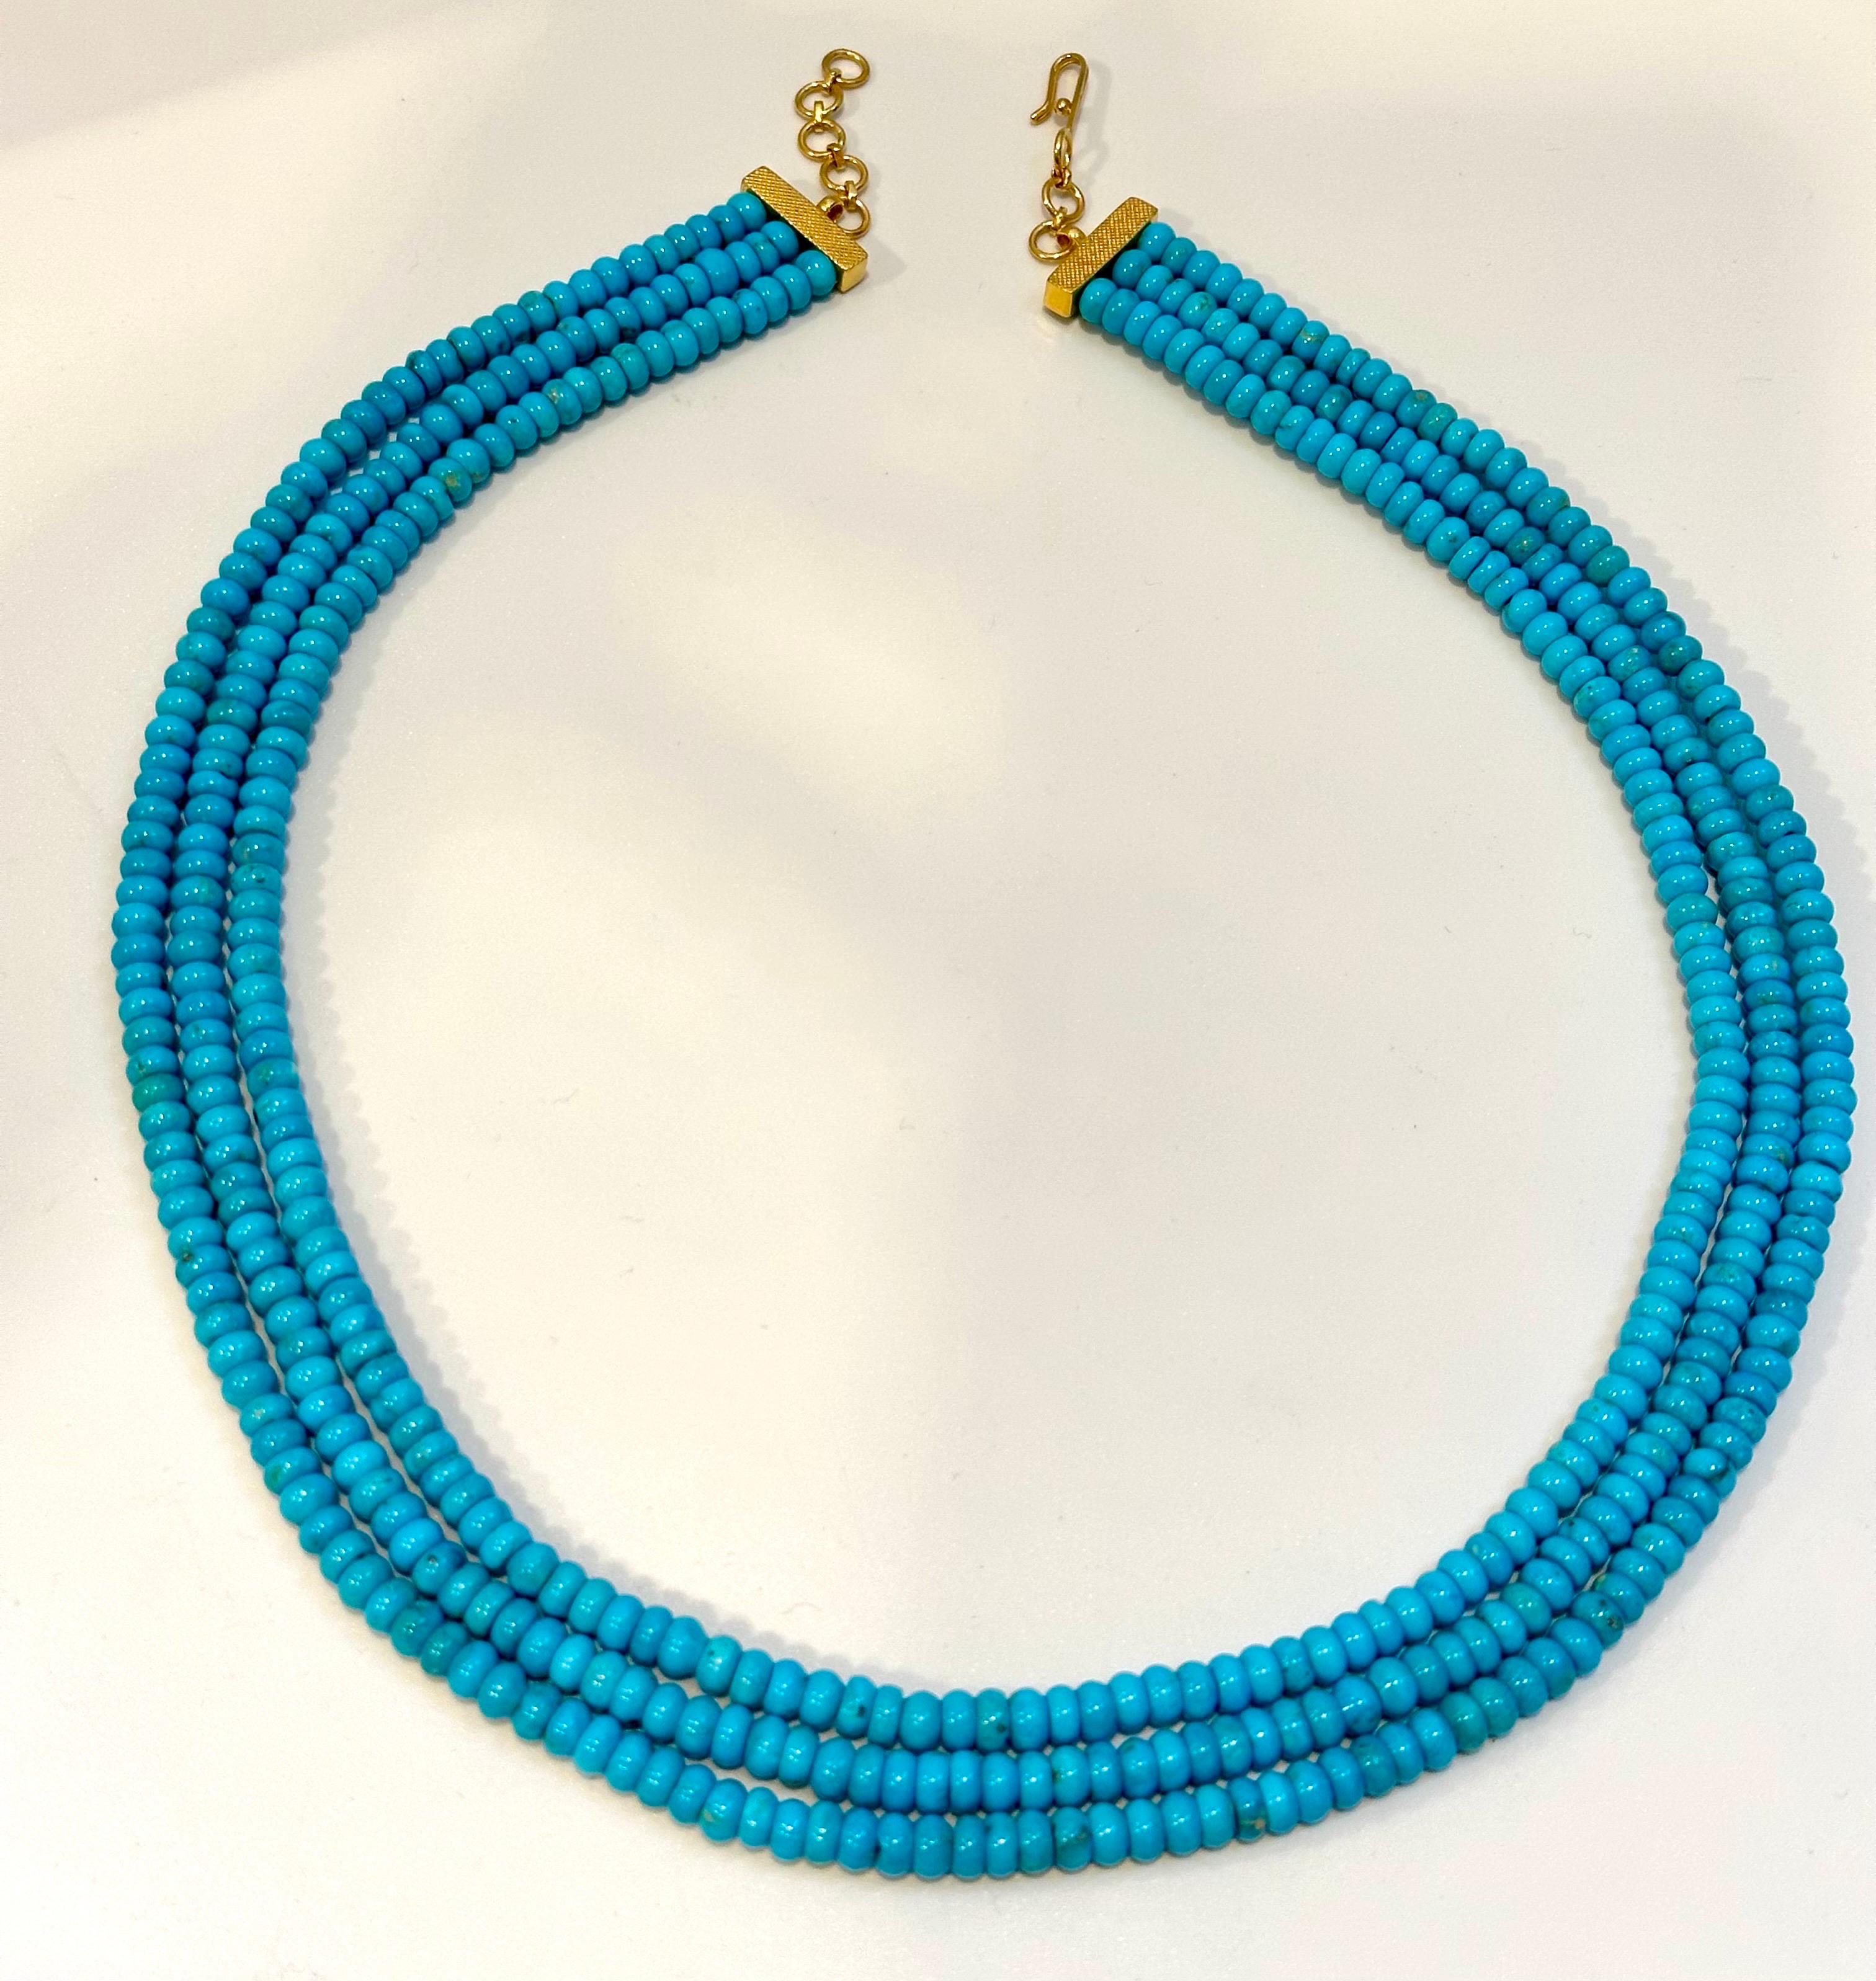 345 Carat Natural Sleeping Beauty Turquoise Necklace, Four Strand 14 Karat Gold For Sale 1